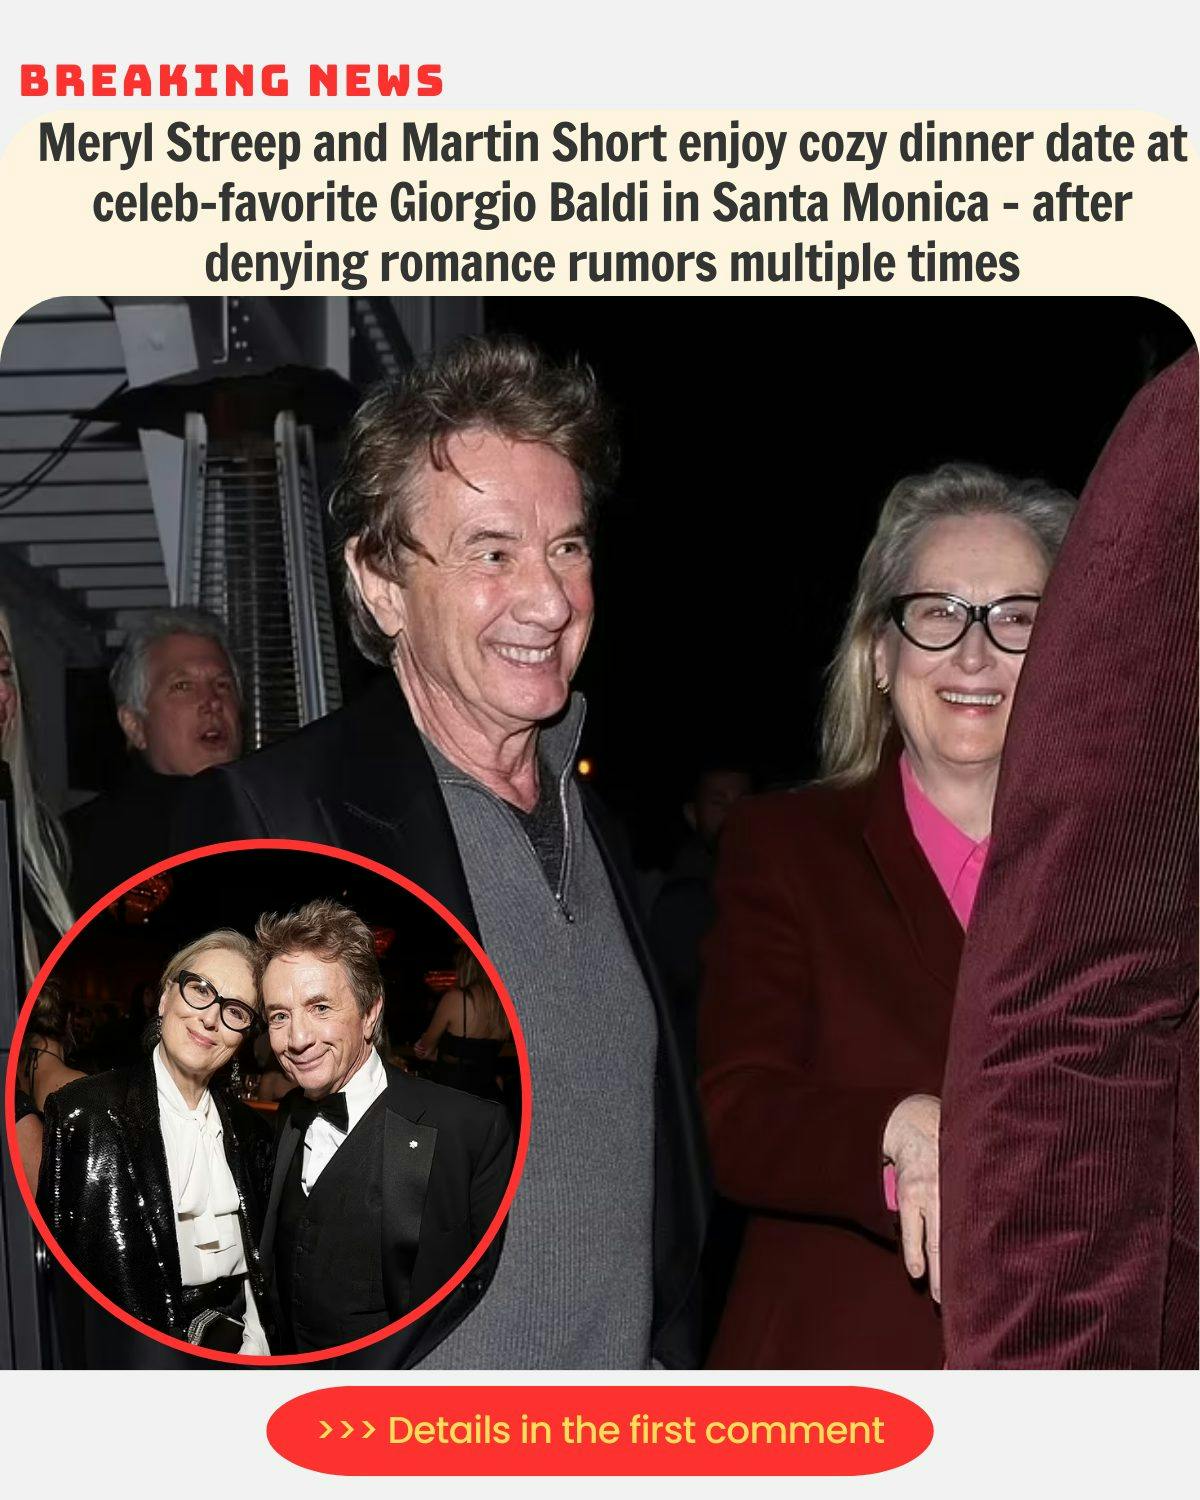 Cover Image for Meryl Streep and Martin Short enjoy cozy dinner date at celeb-favorite Giorgio Baldi in Santa Monica – after denying romance rumors multiple times